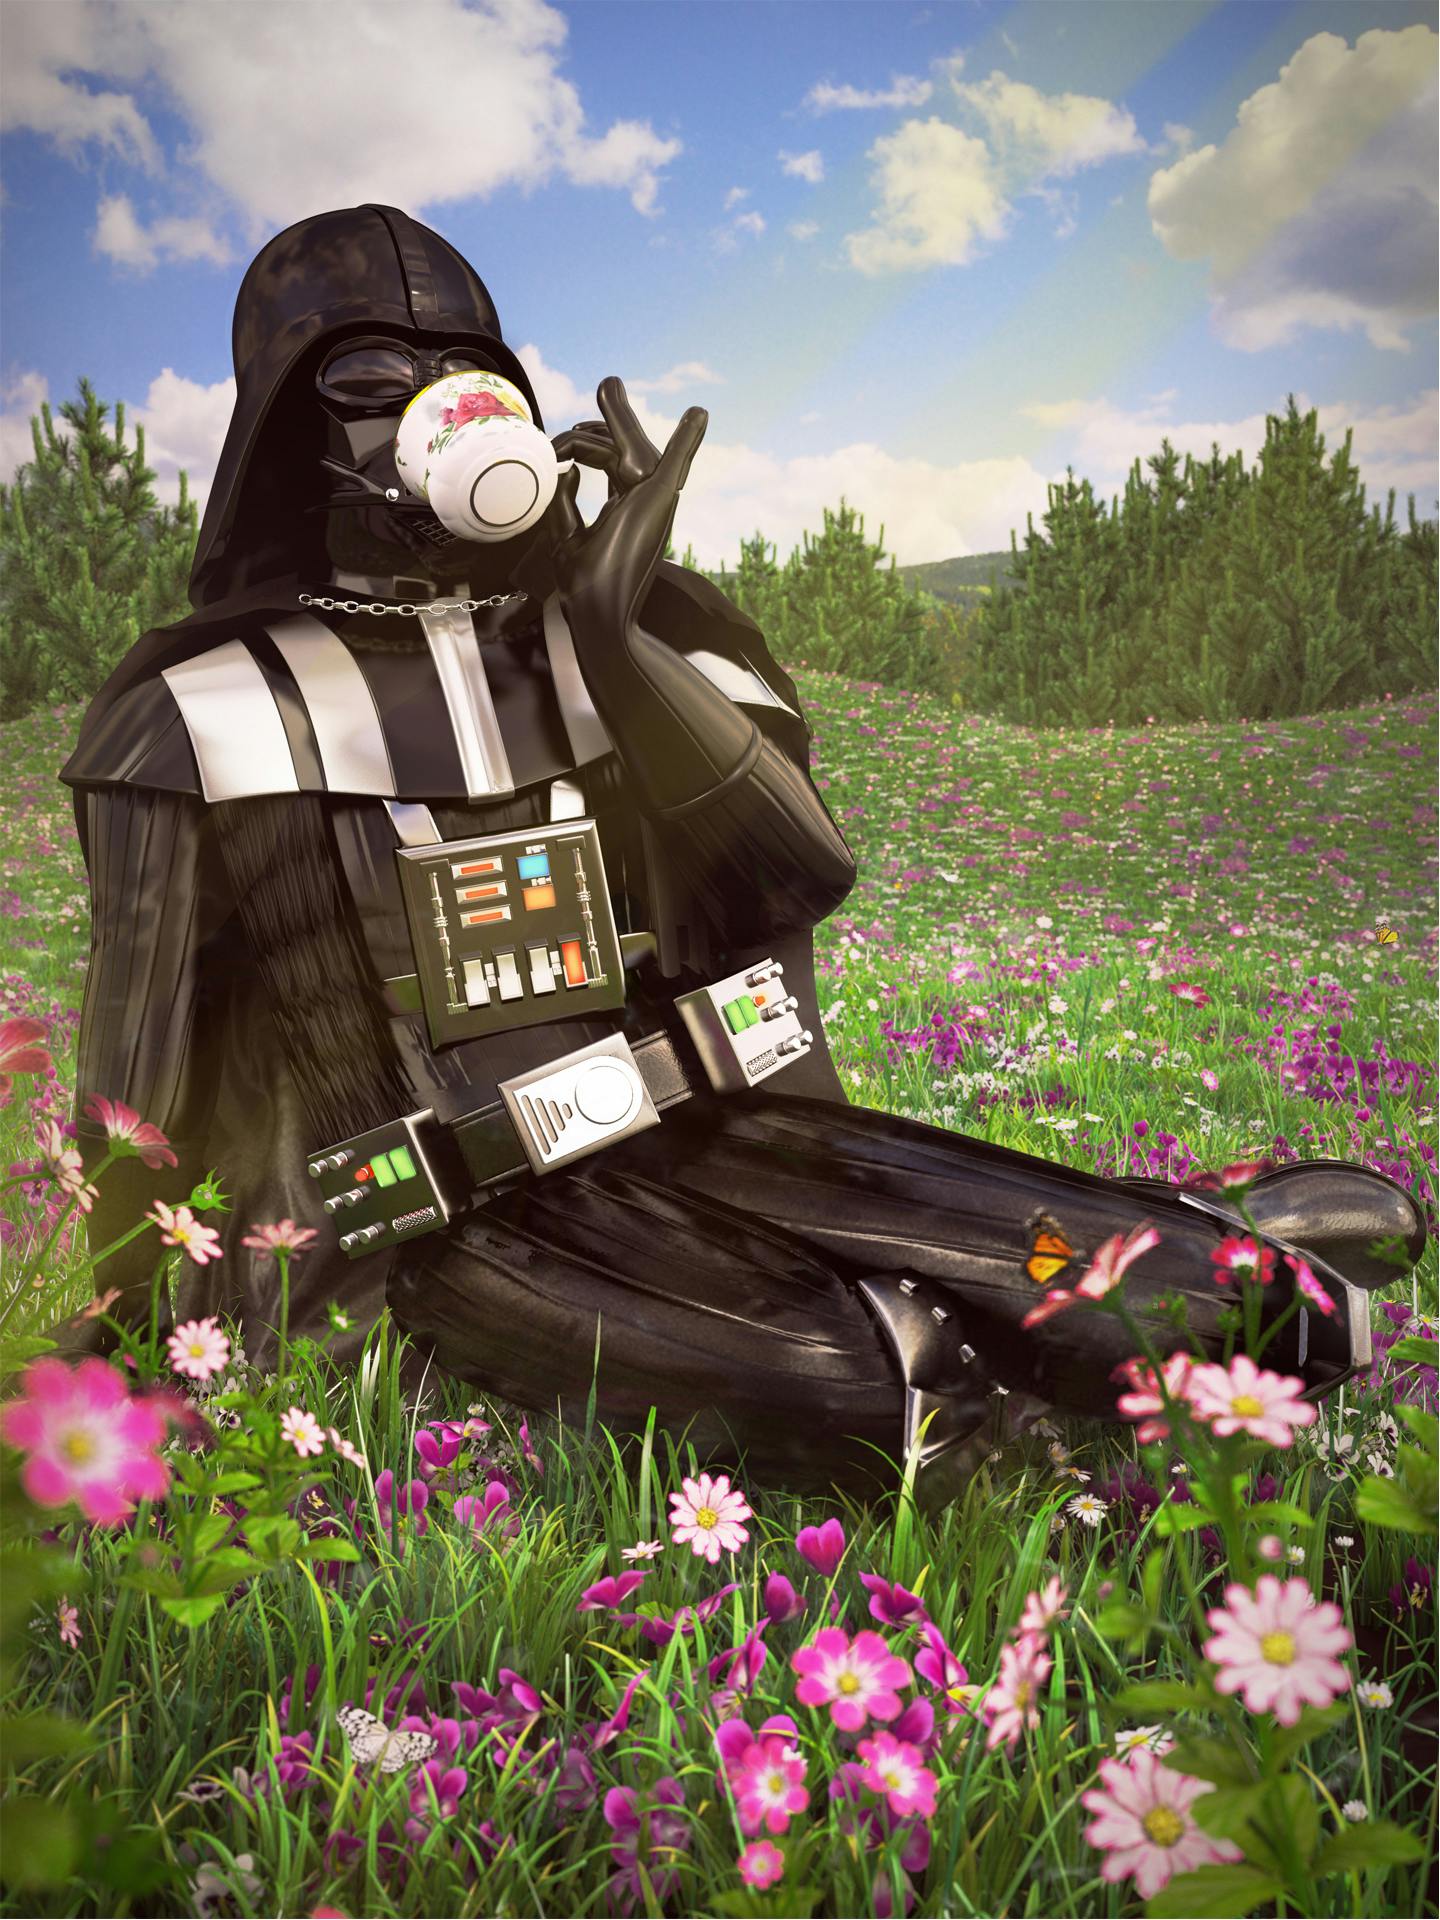 The Old English Rose china pattern really goes with the Durasteel helmet, Darth.